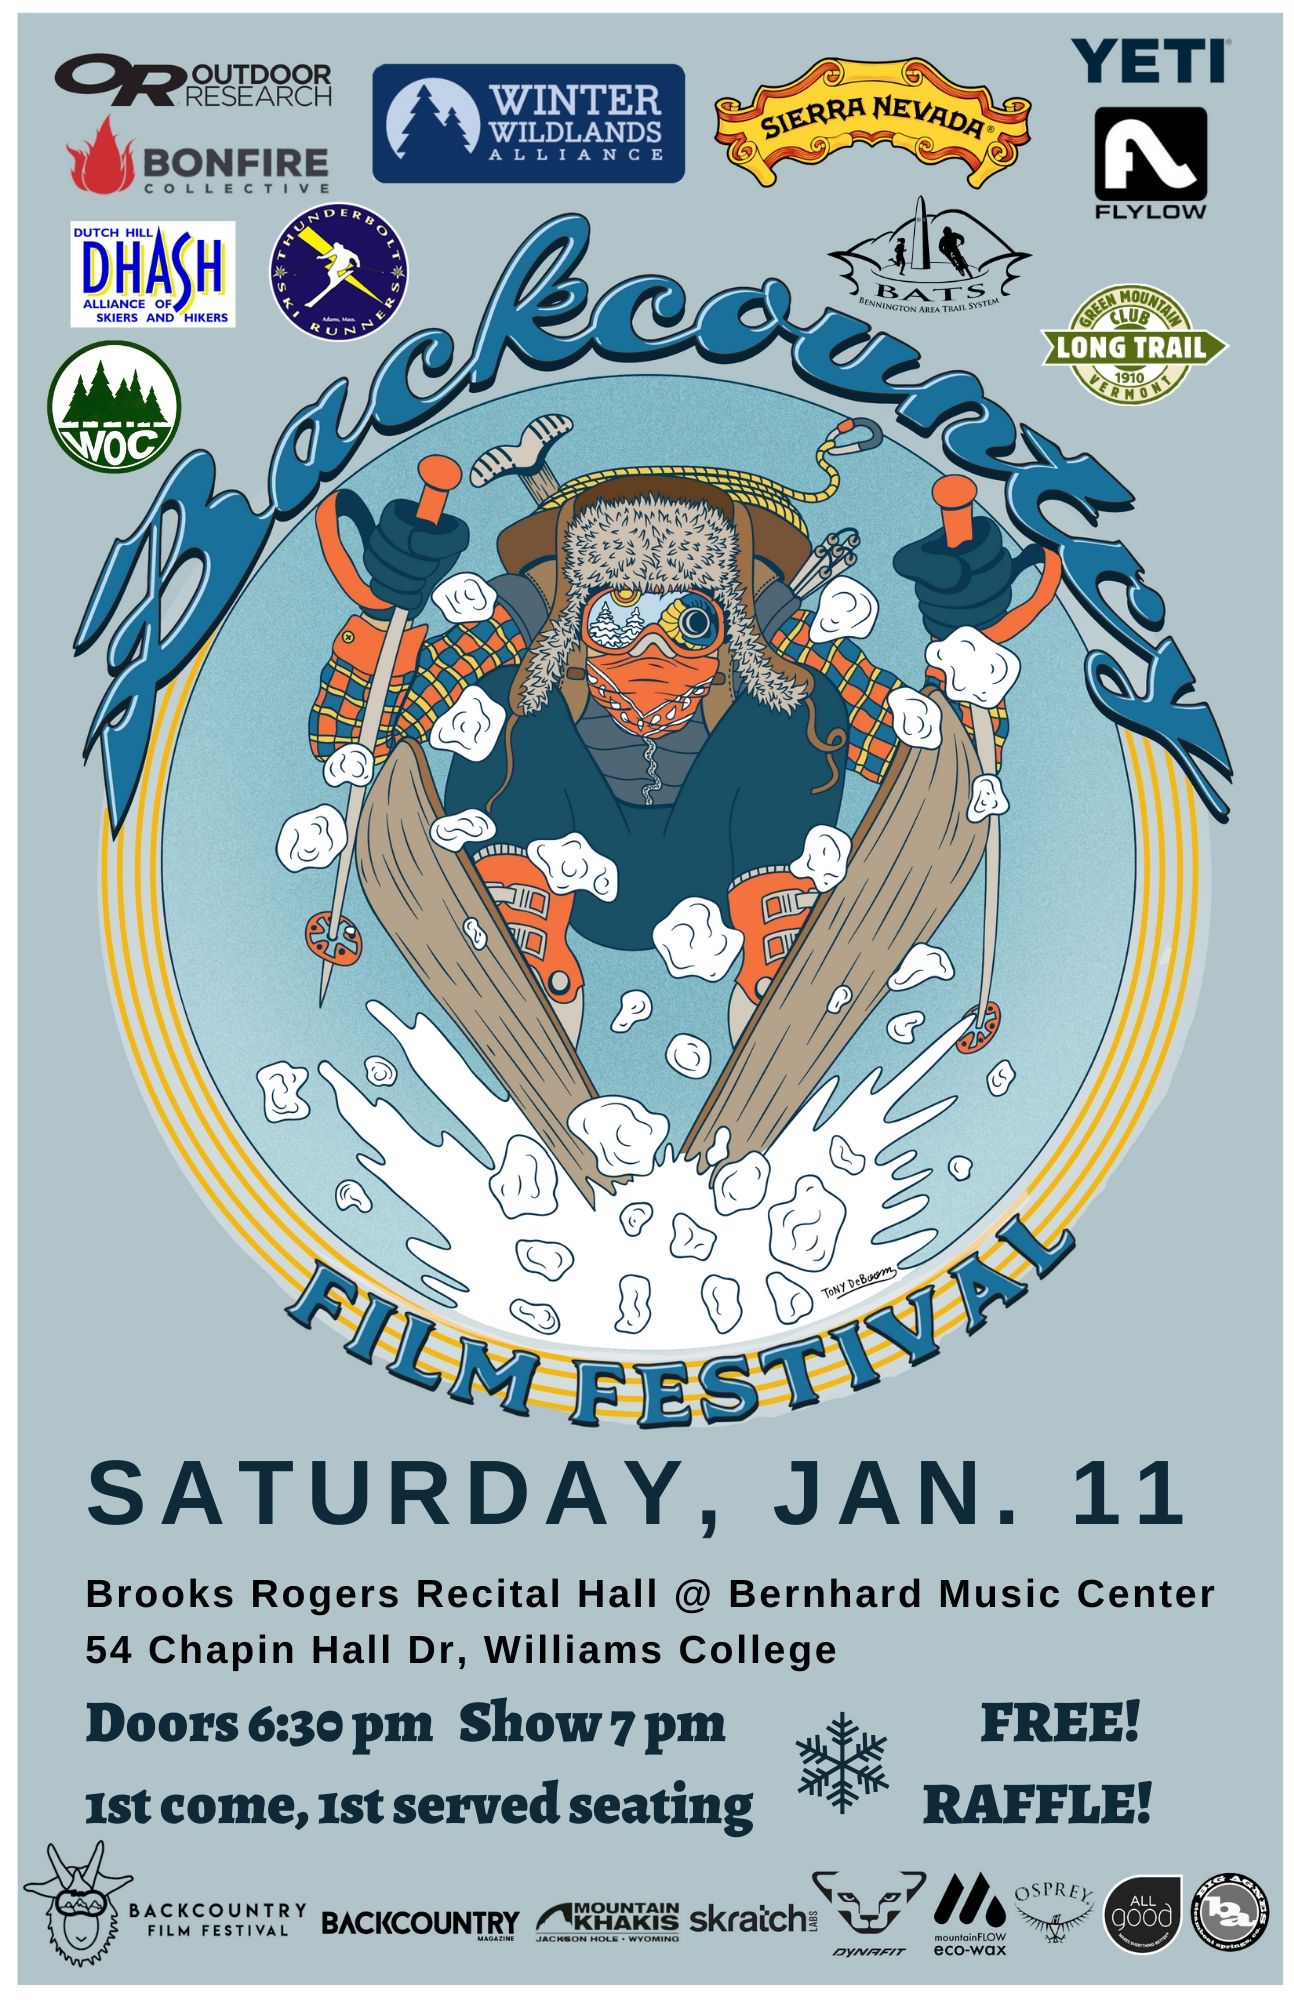 poster of skier and backcountry film fest information